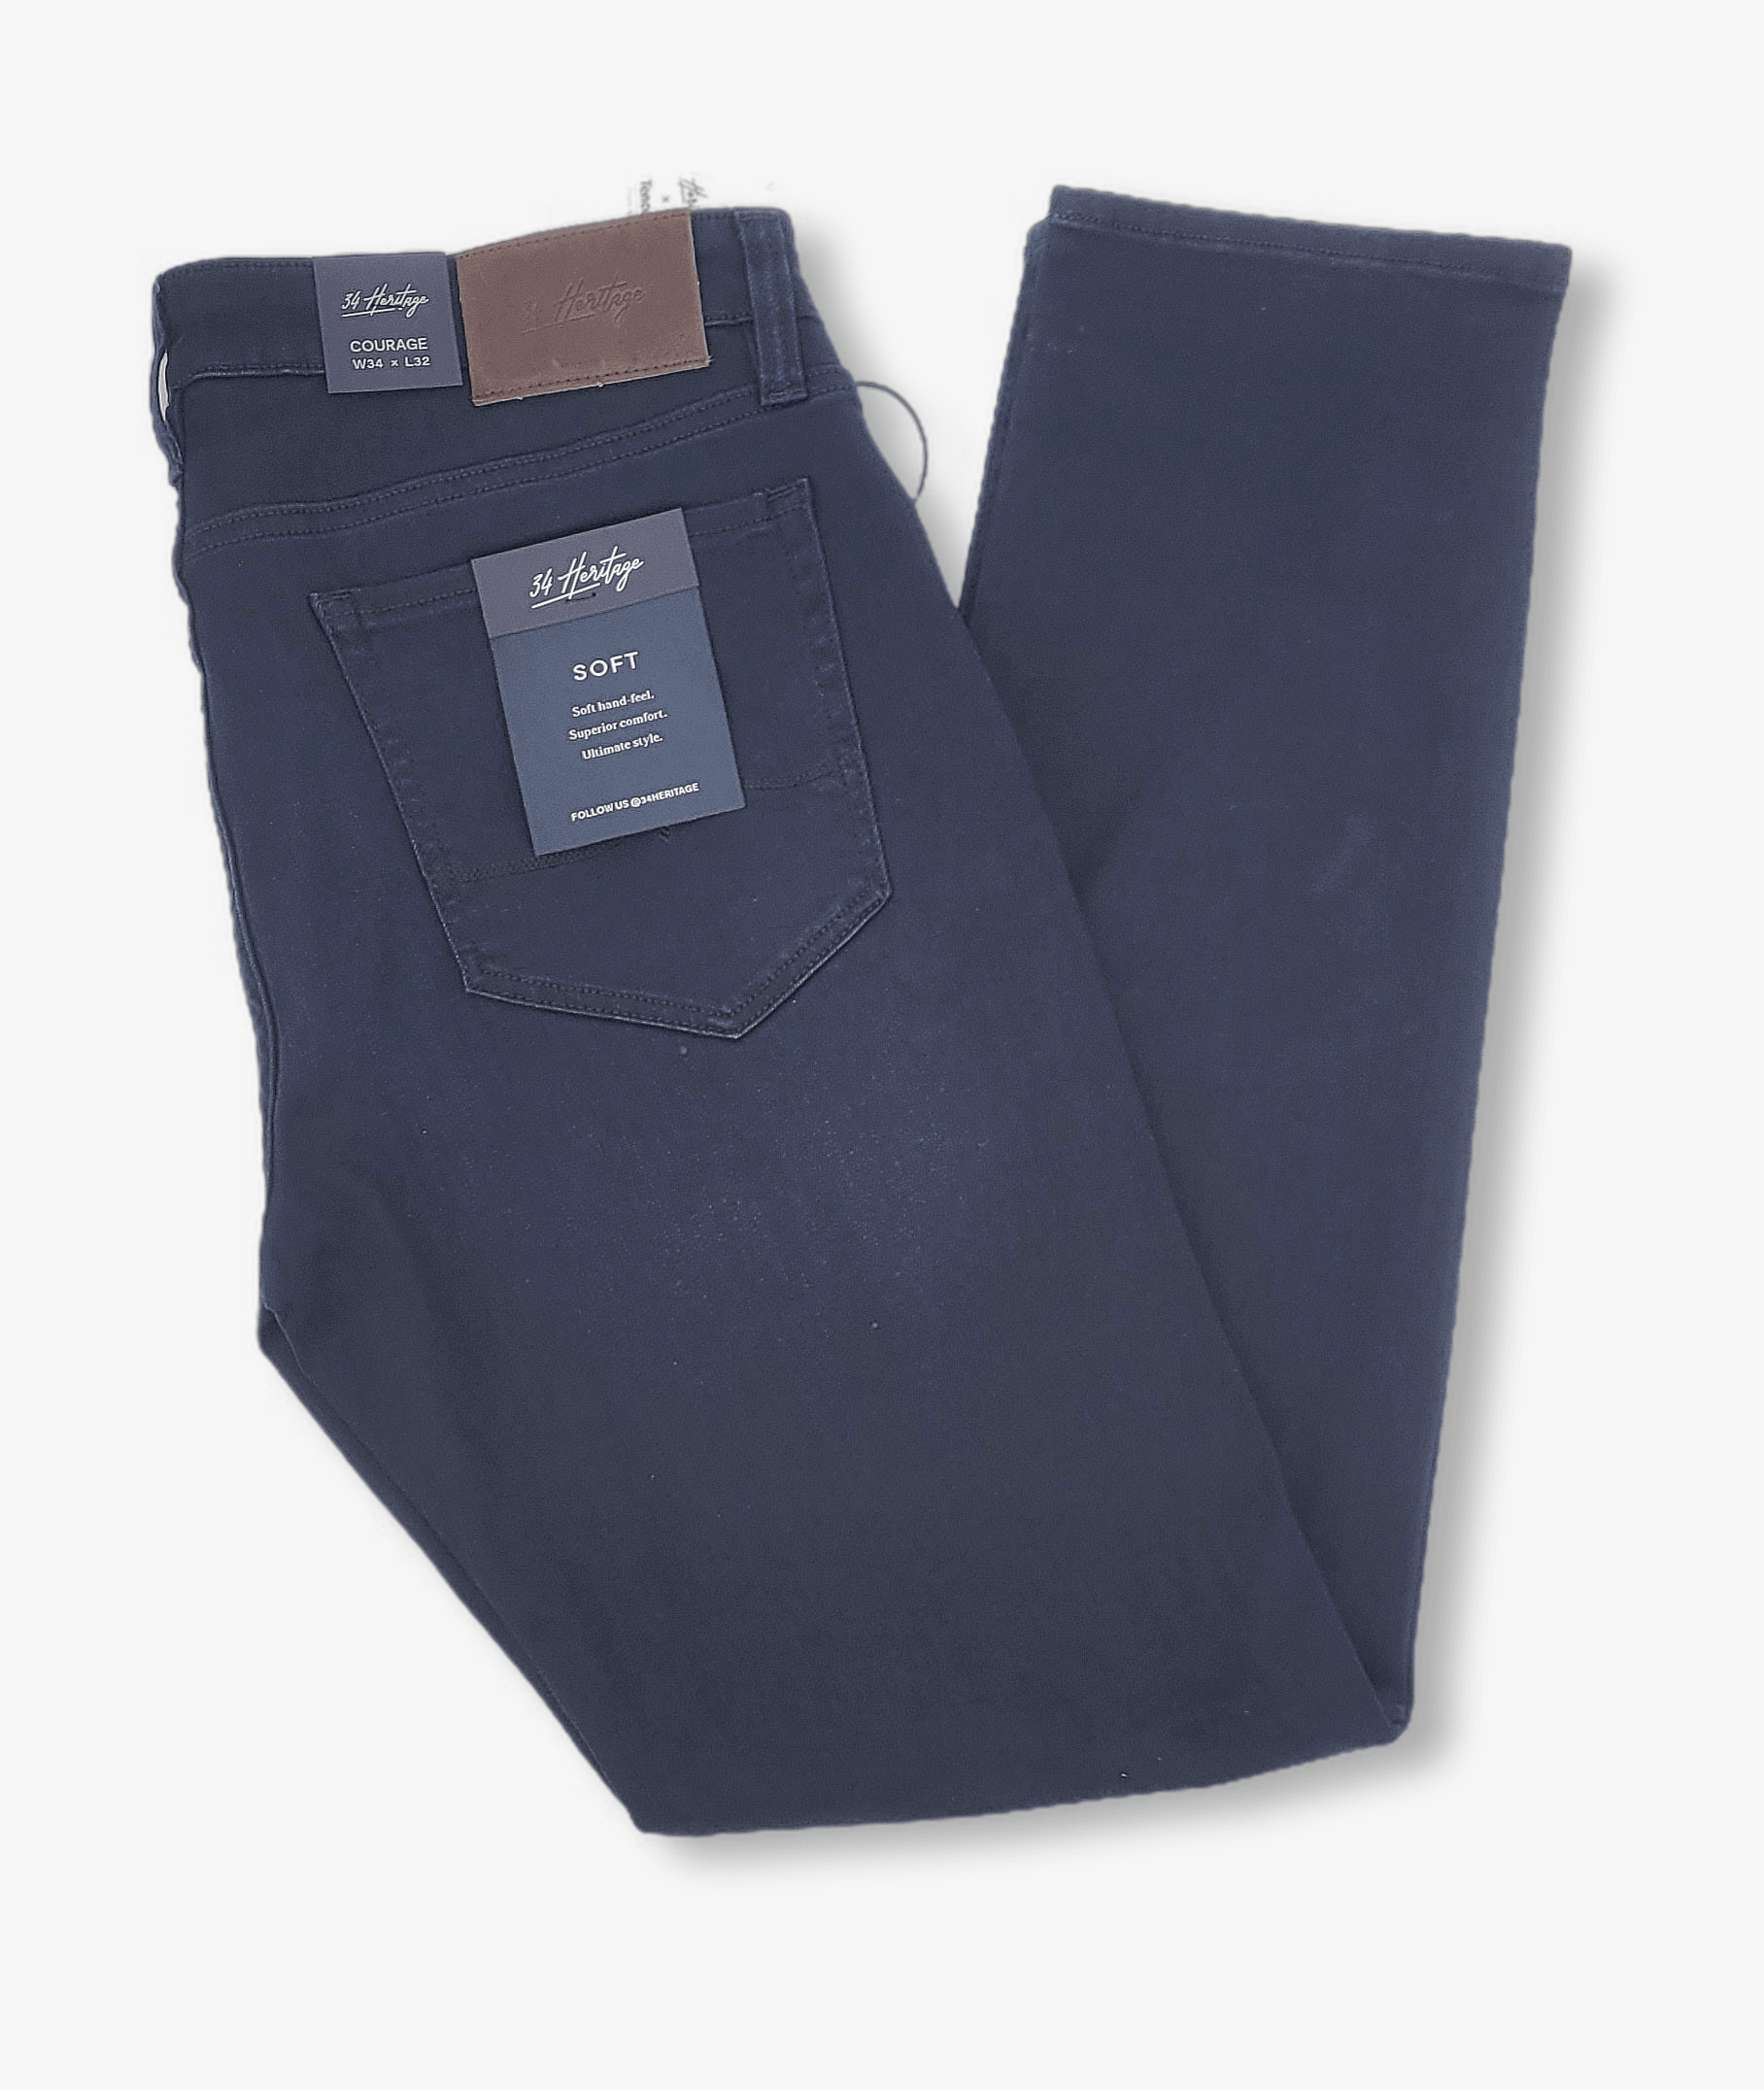 Laflamme- Jeans Courage - 34 Heritage